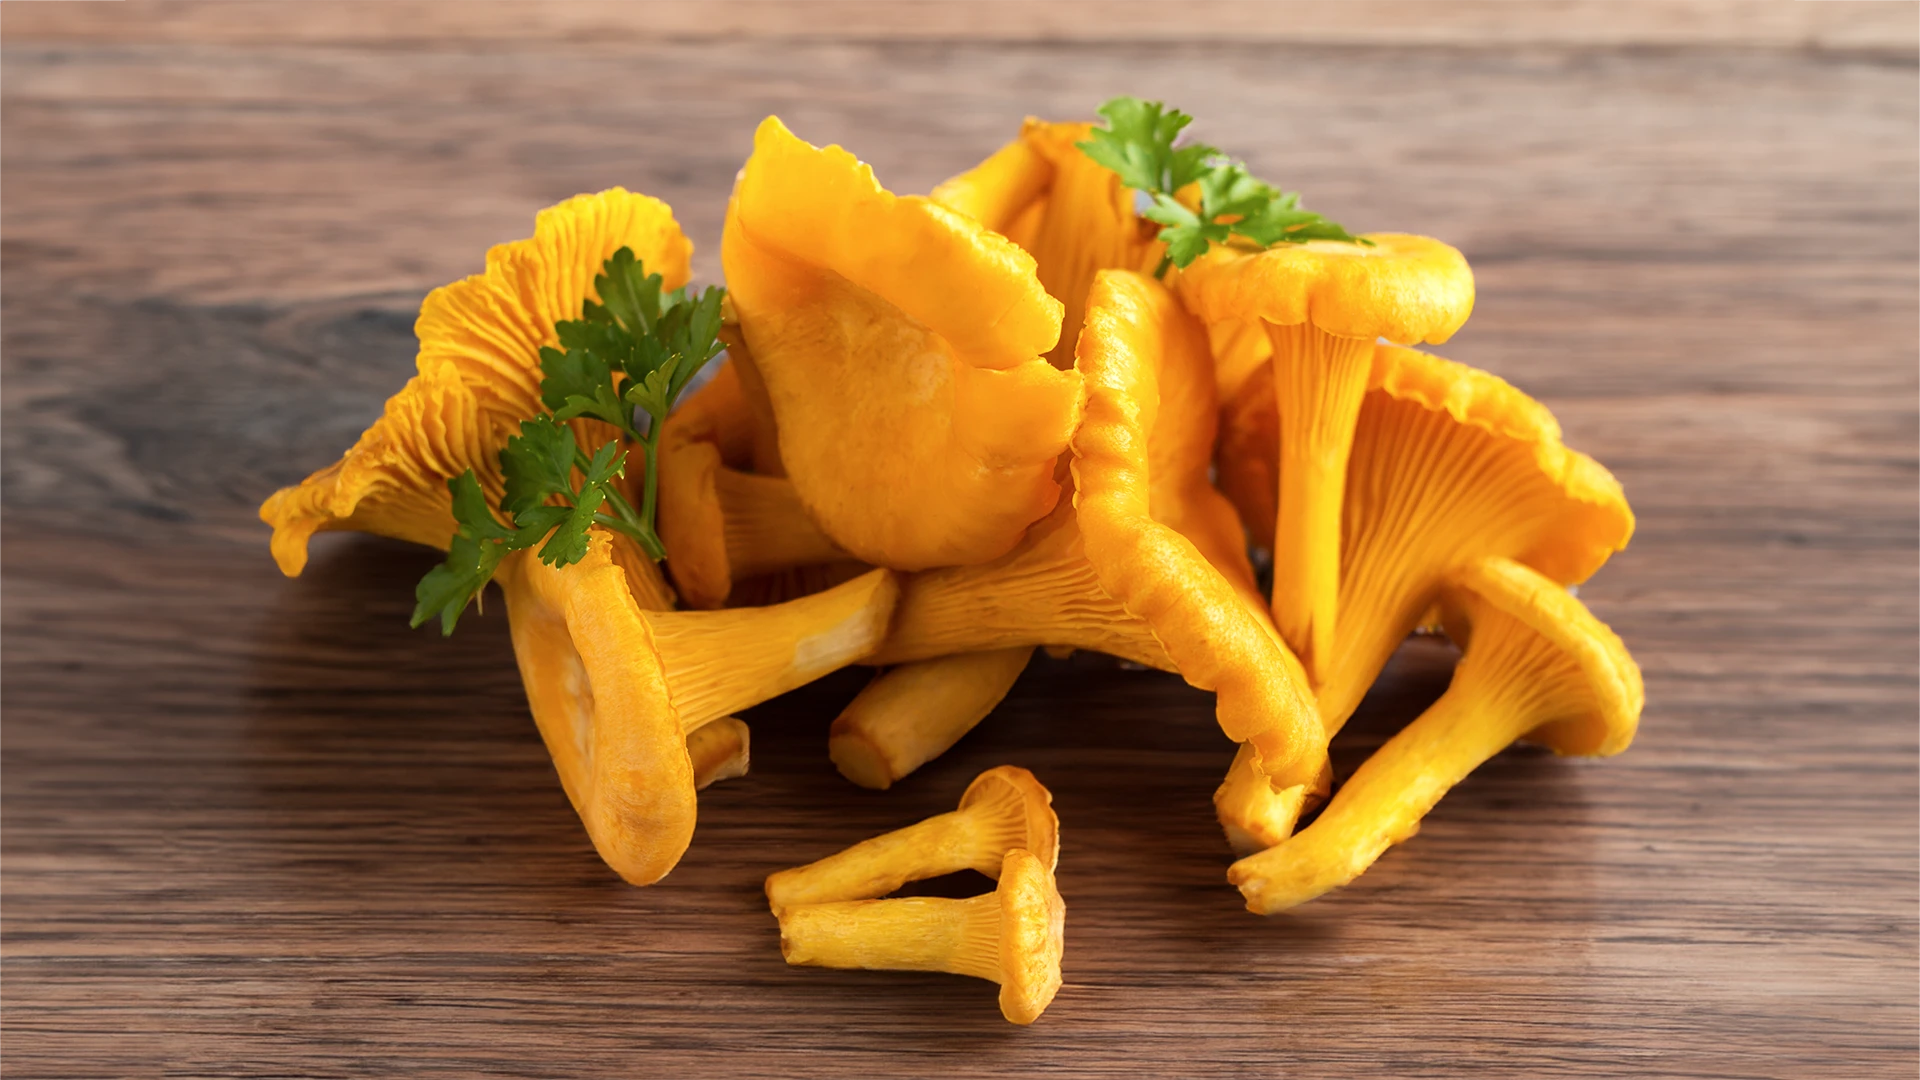 Chanterelles: A prebiotic packed with vitamin D and fiber